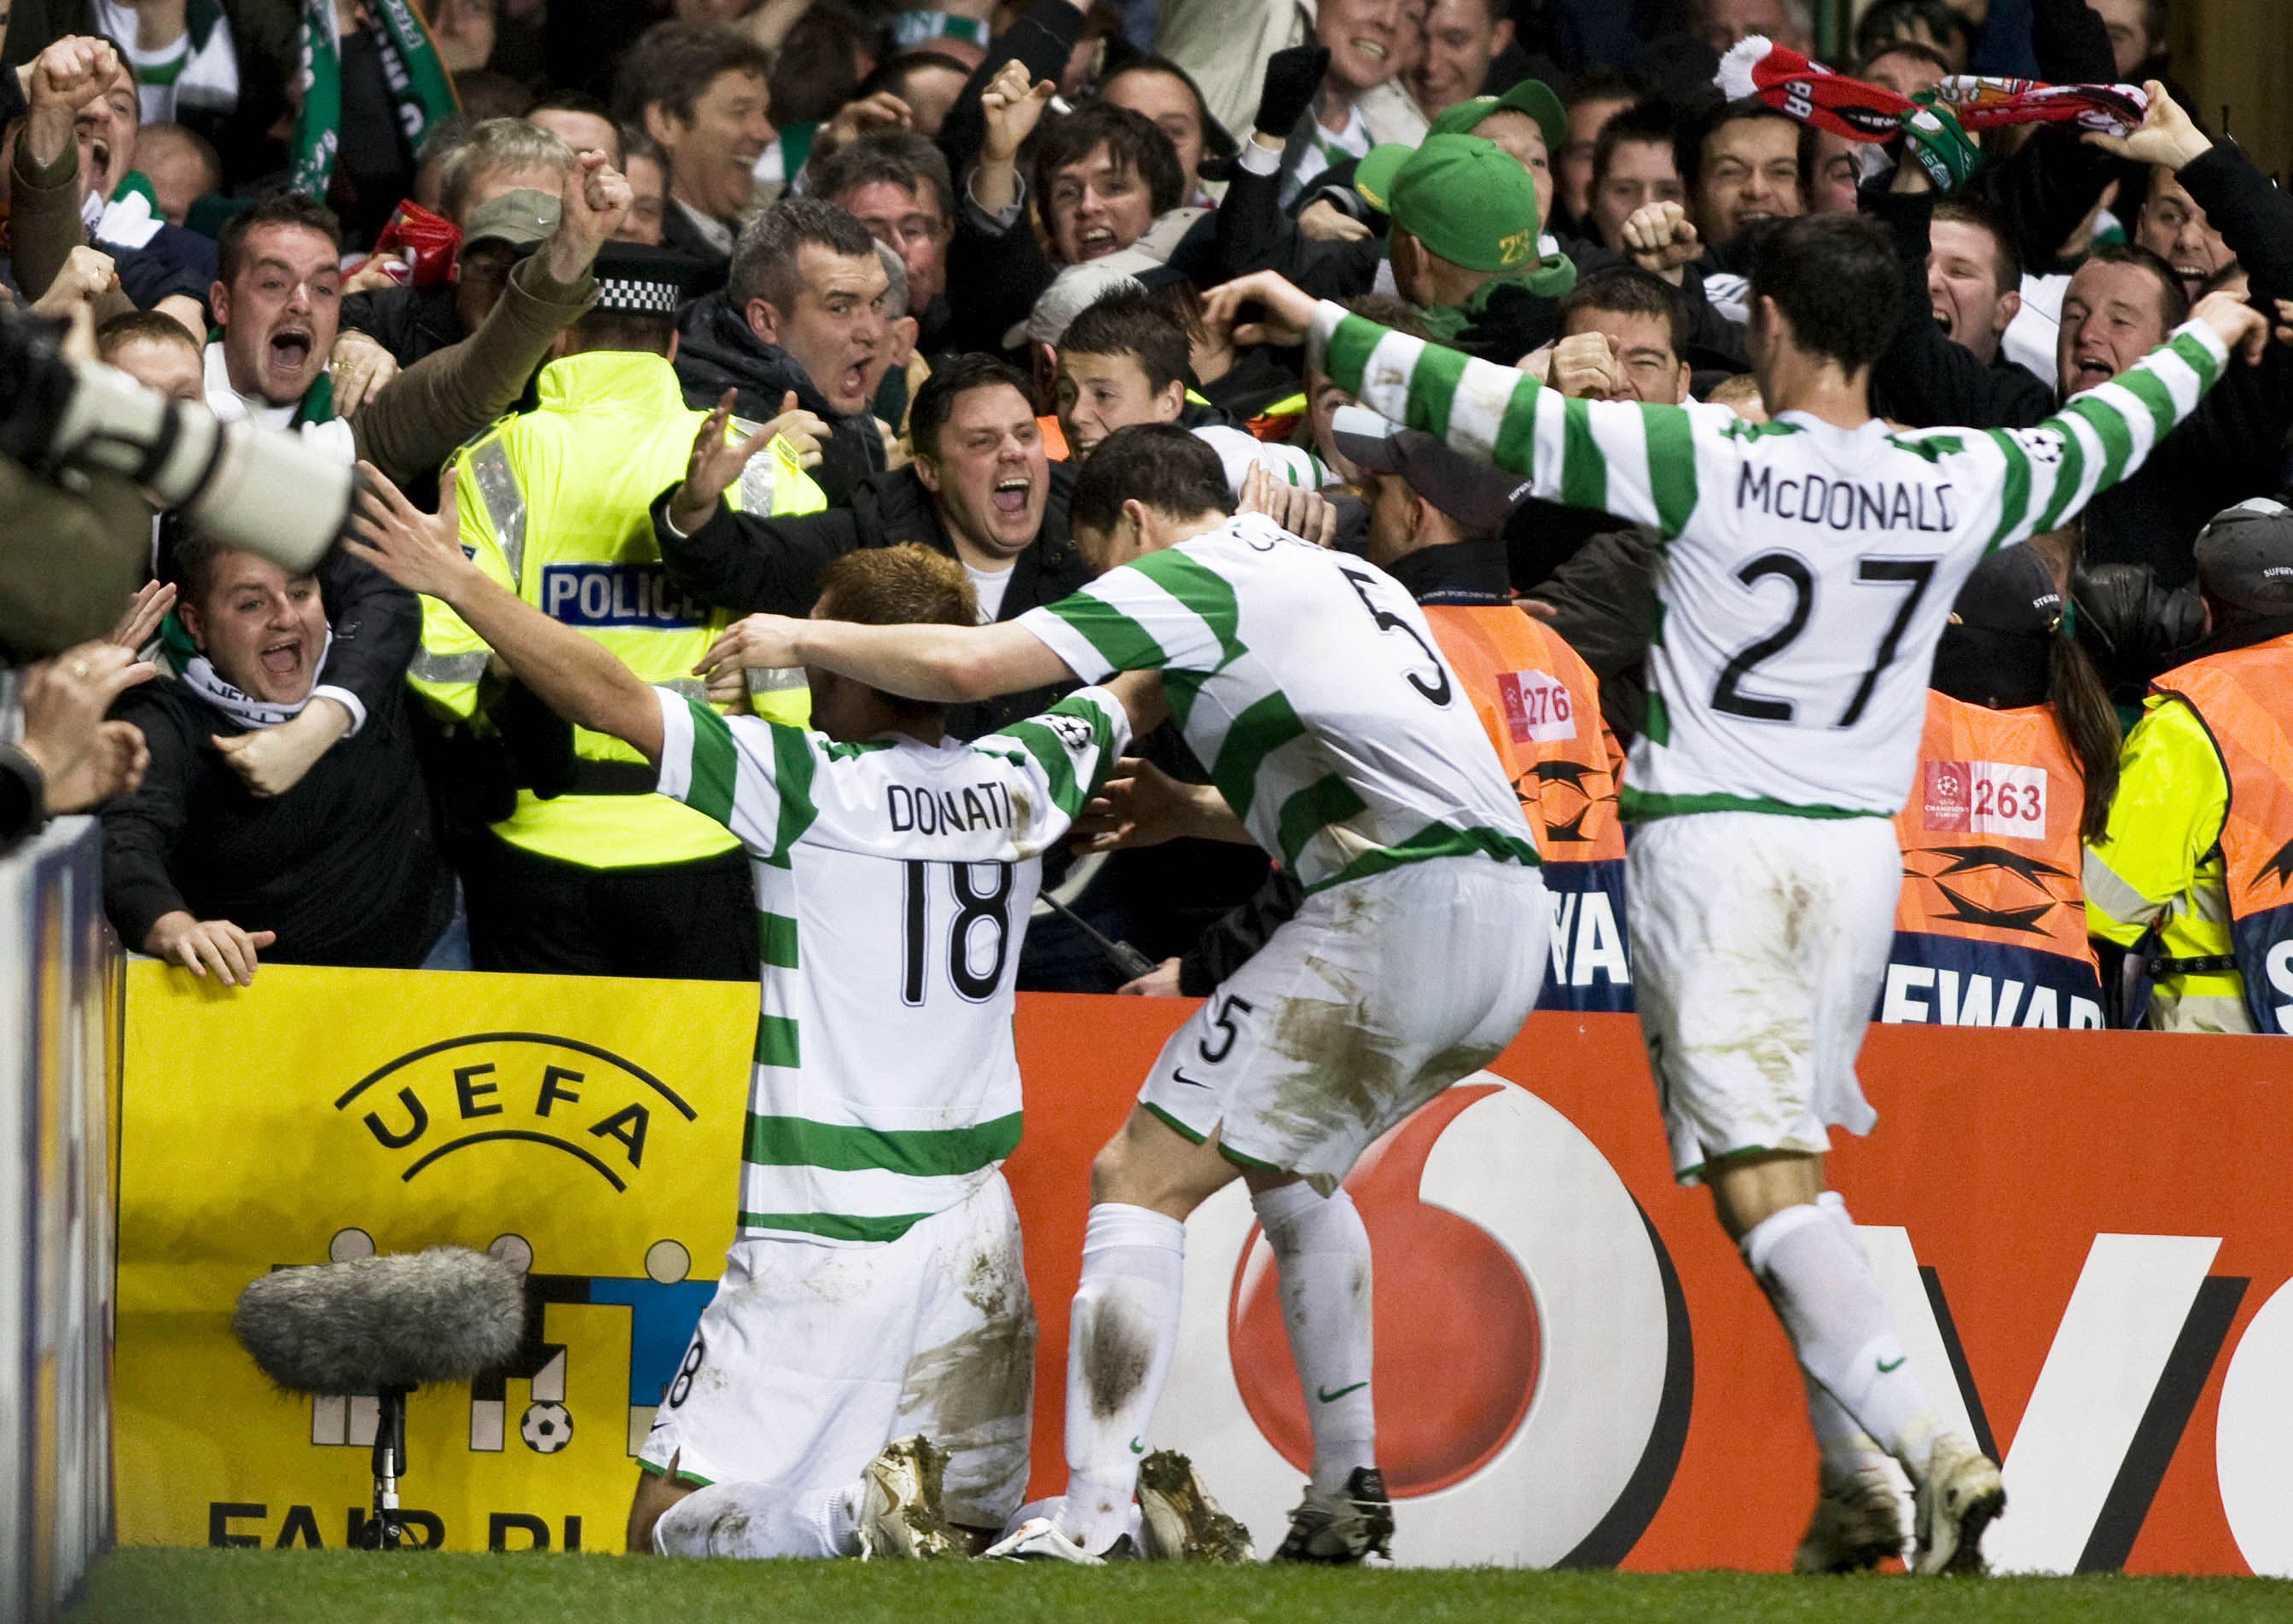 Celtic Park erupted following Donati's late winner to all but seal last-16 qualification.